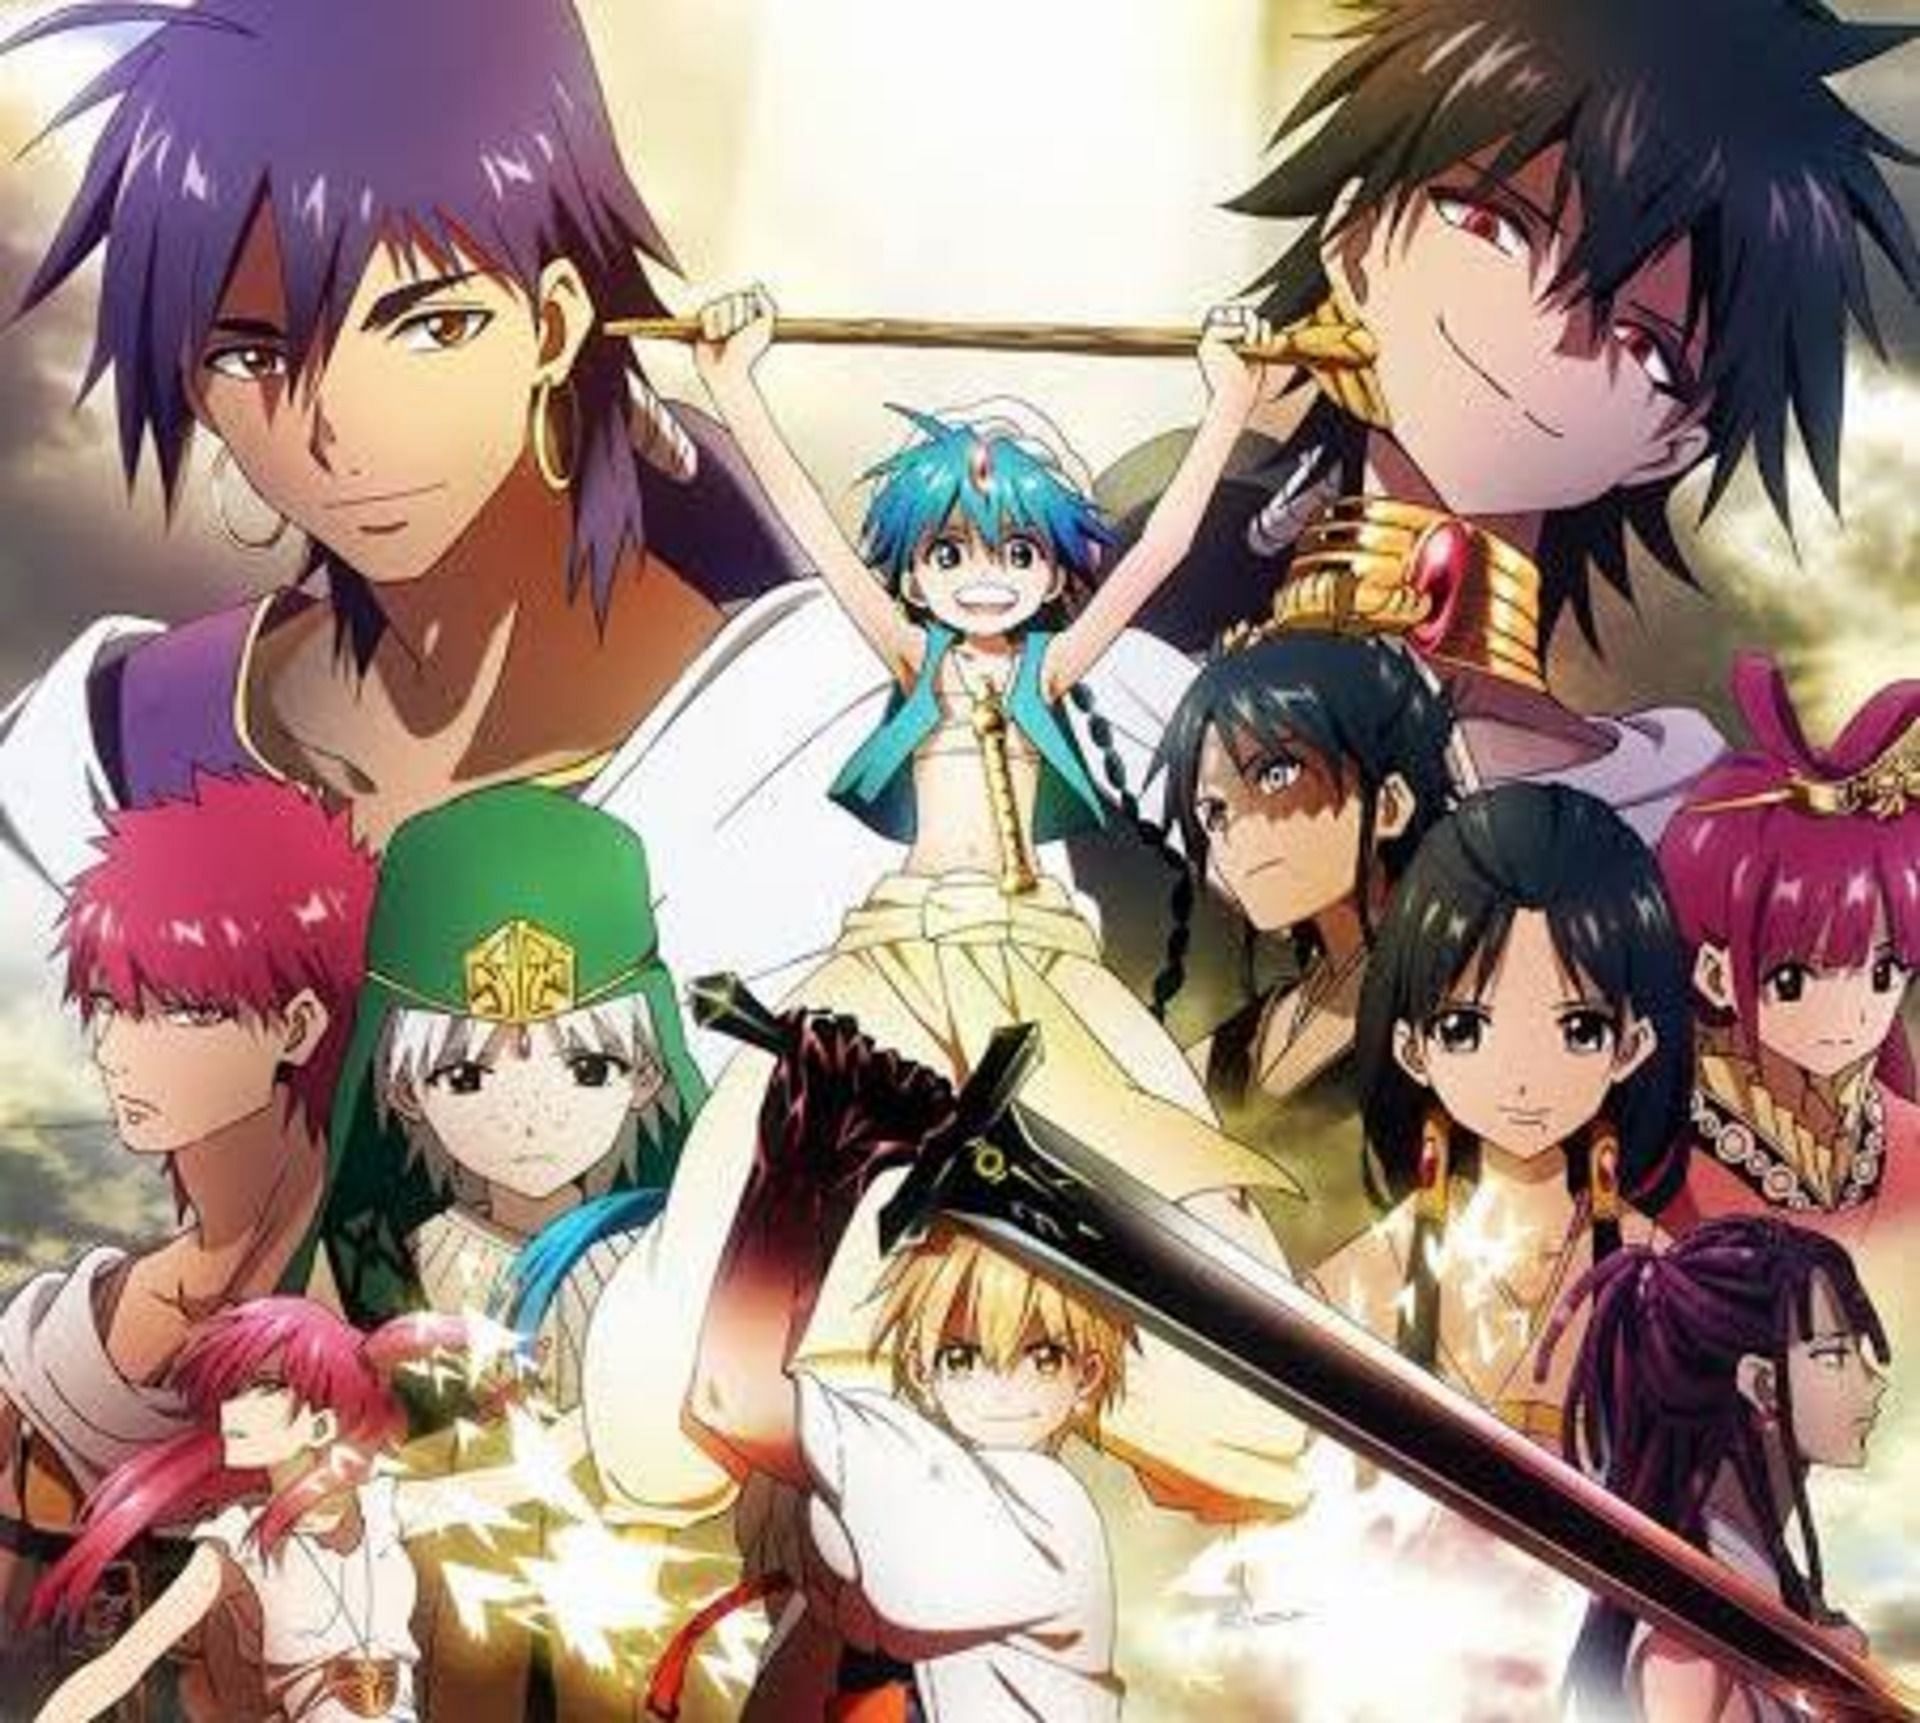 Magi: The Labyrinth of Magic (Image via A-1 Pictures)